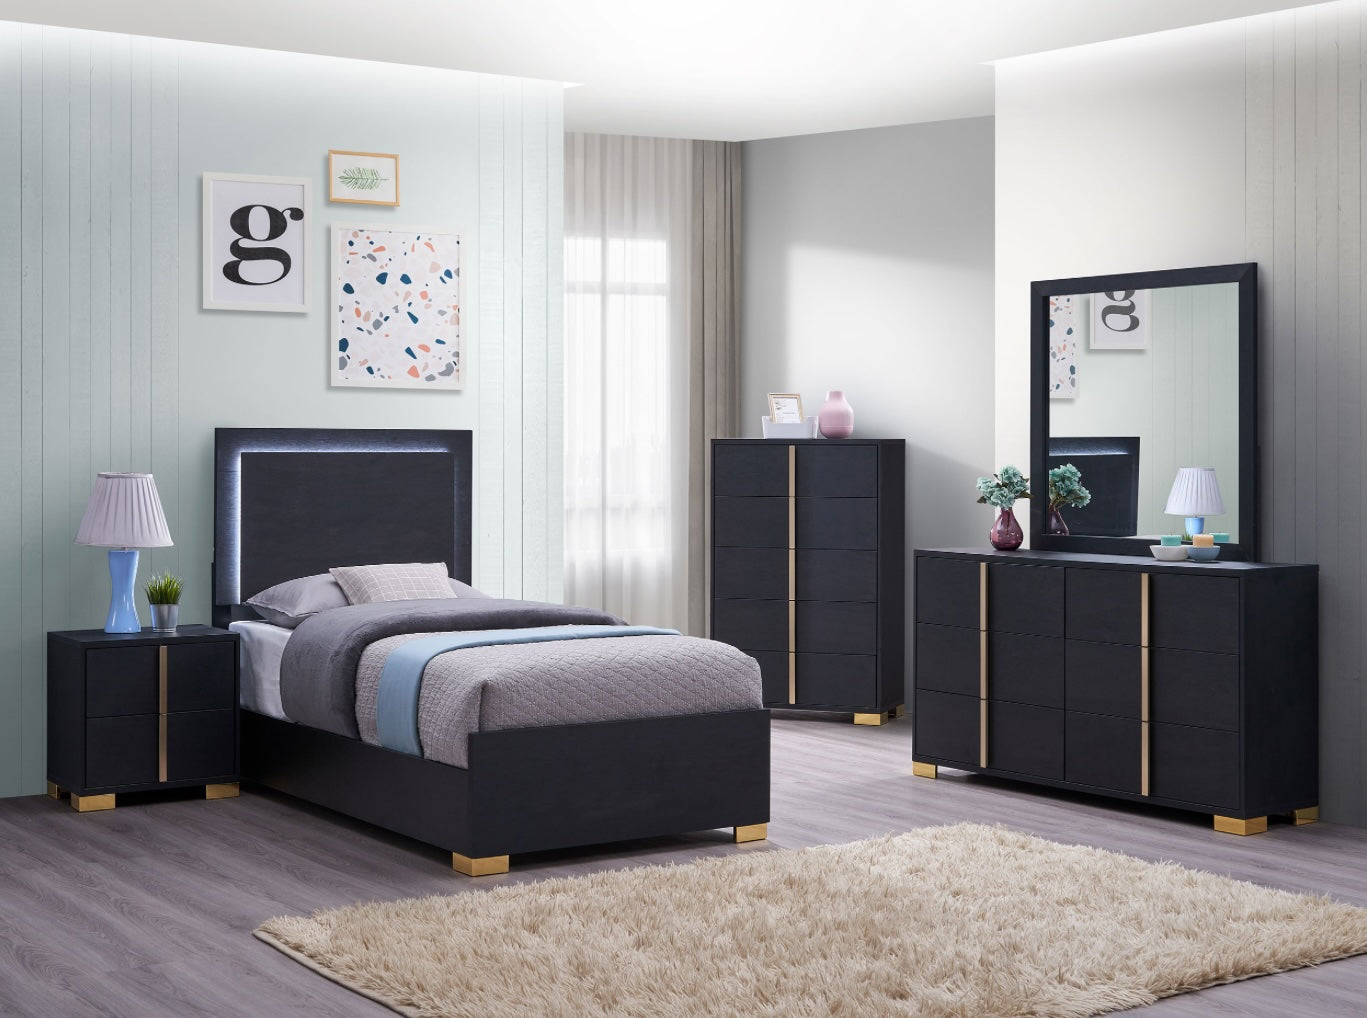 Marceline Twin Bed with LED Lighted Headboard - Black & Gold